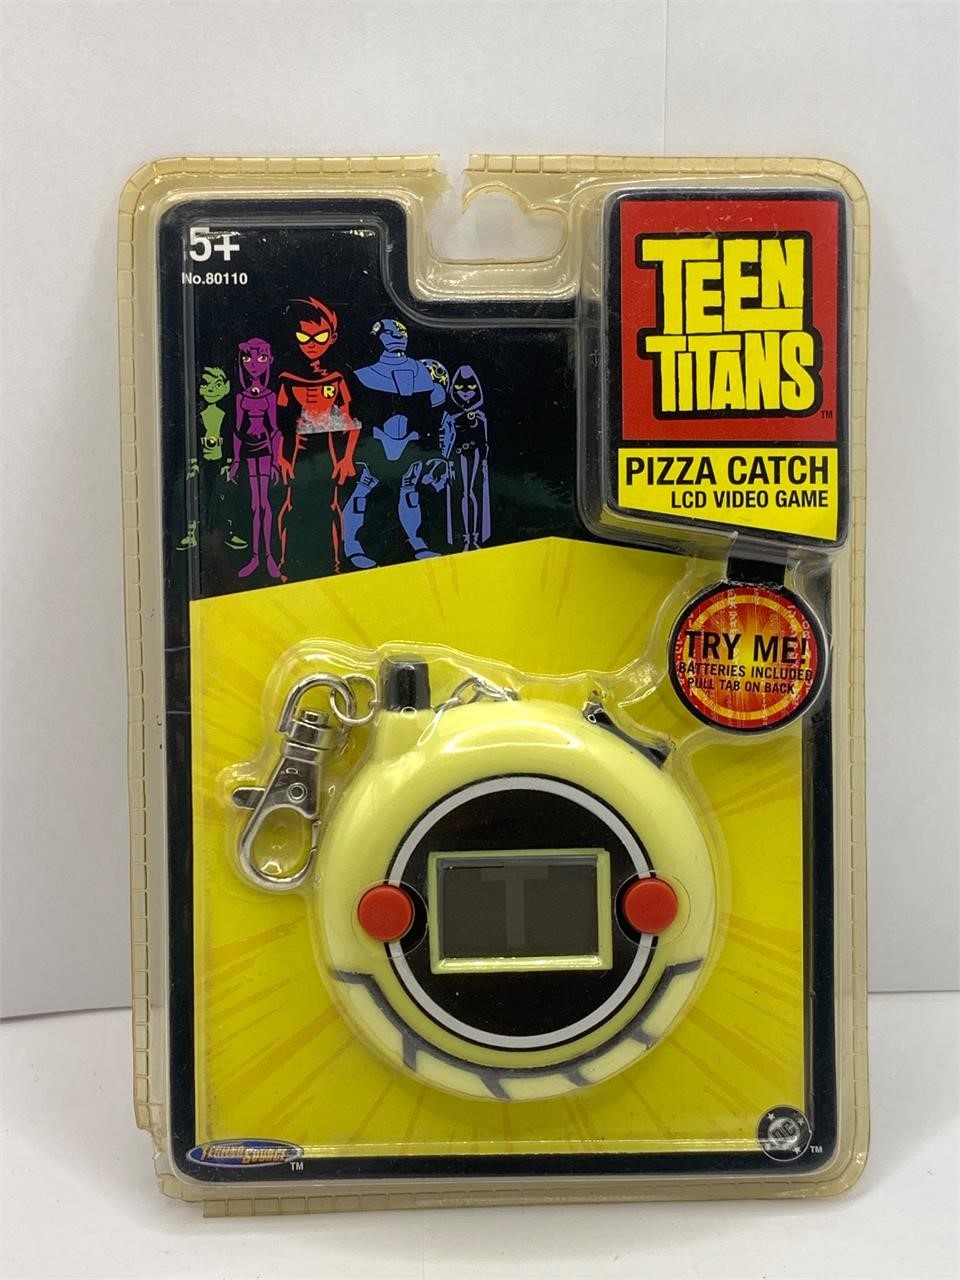 Teen Titans Pizza Catch LCD Video Game